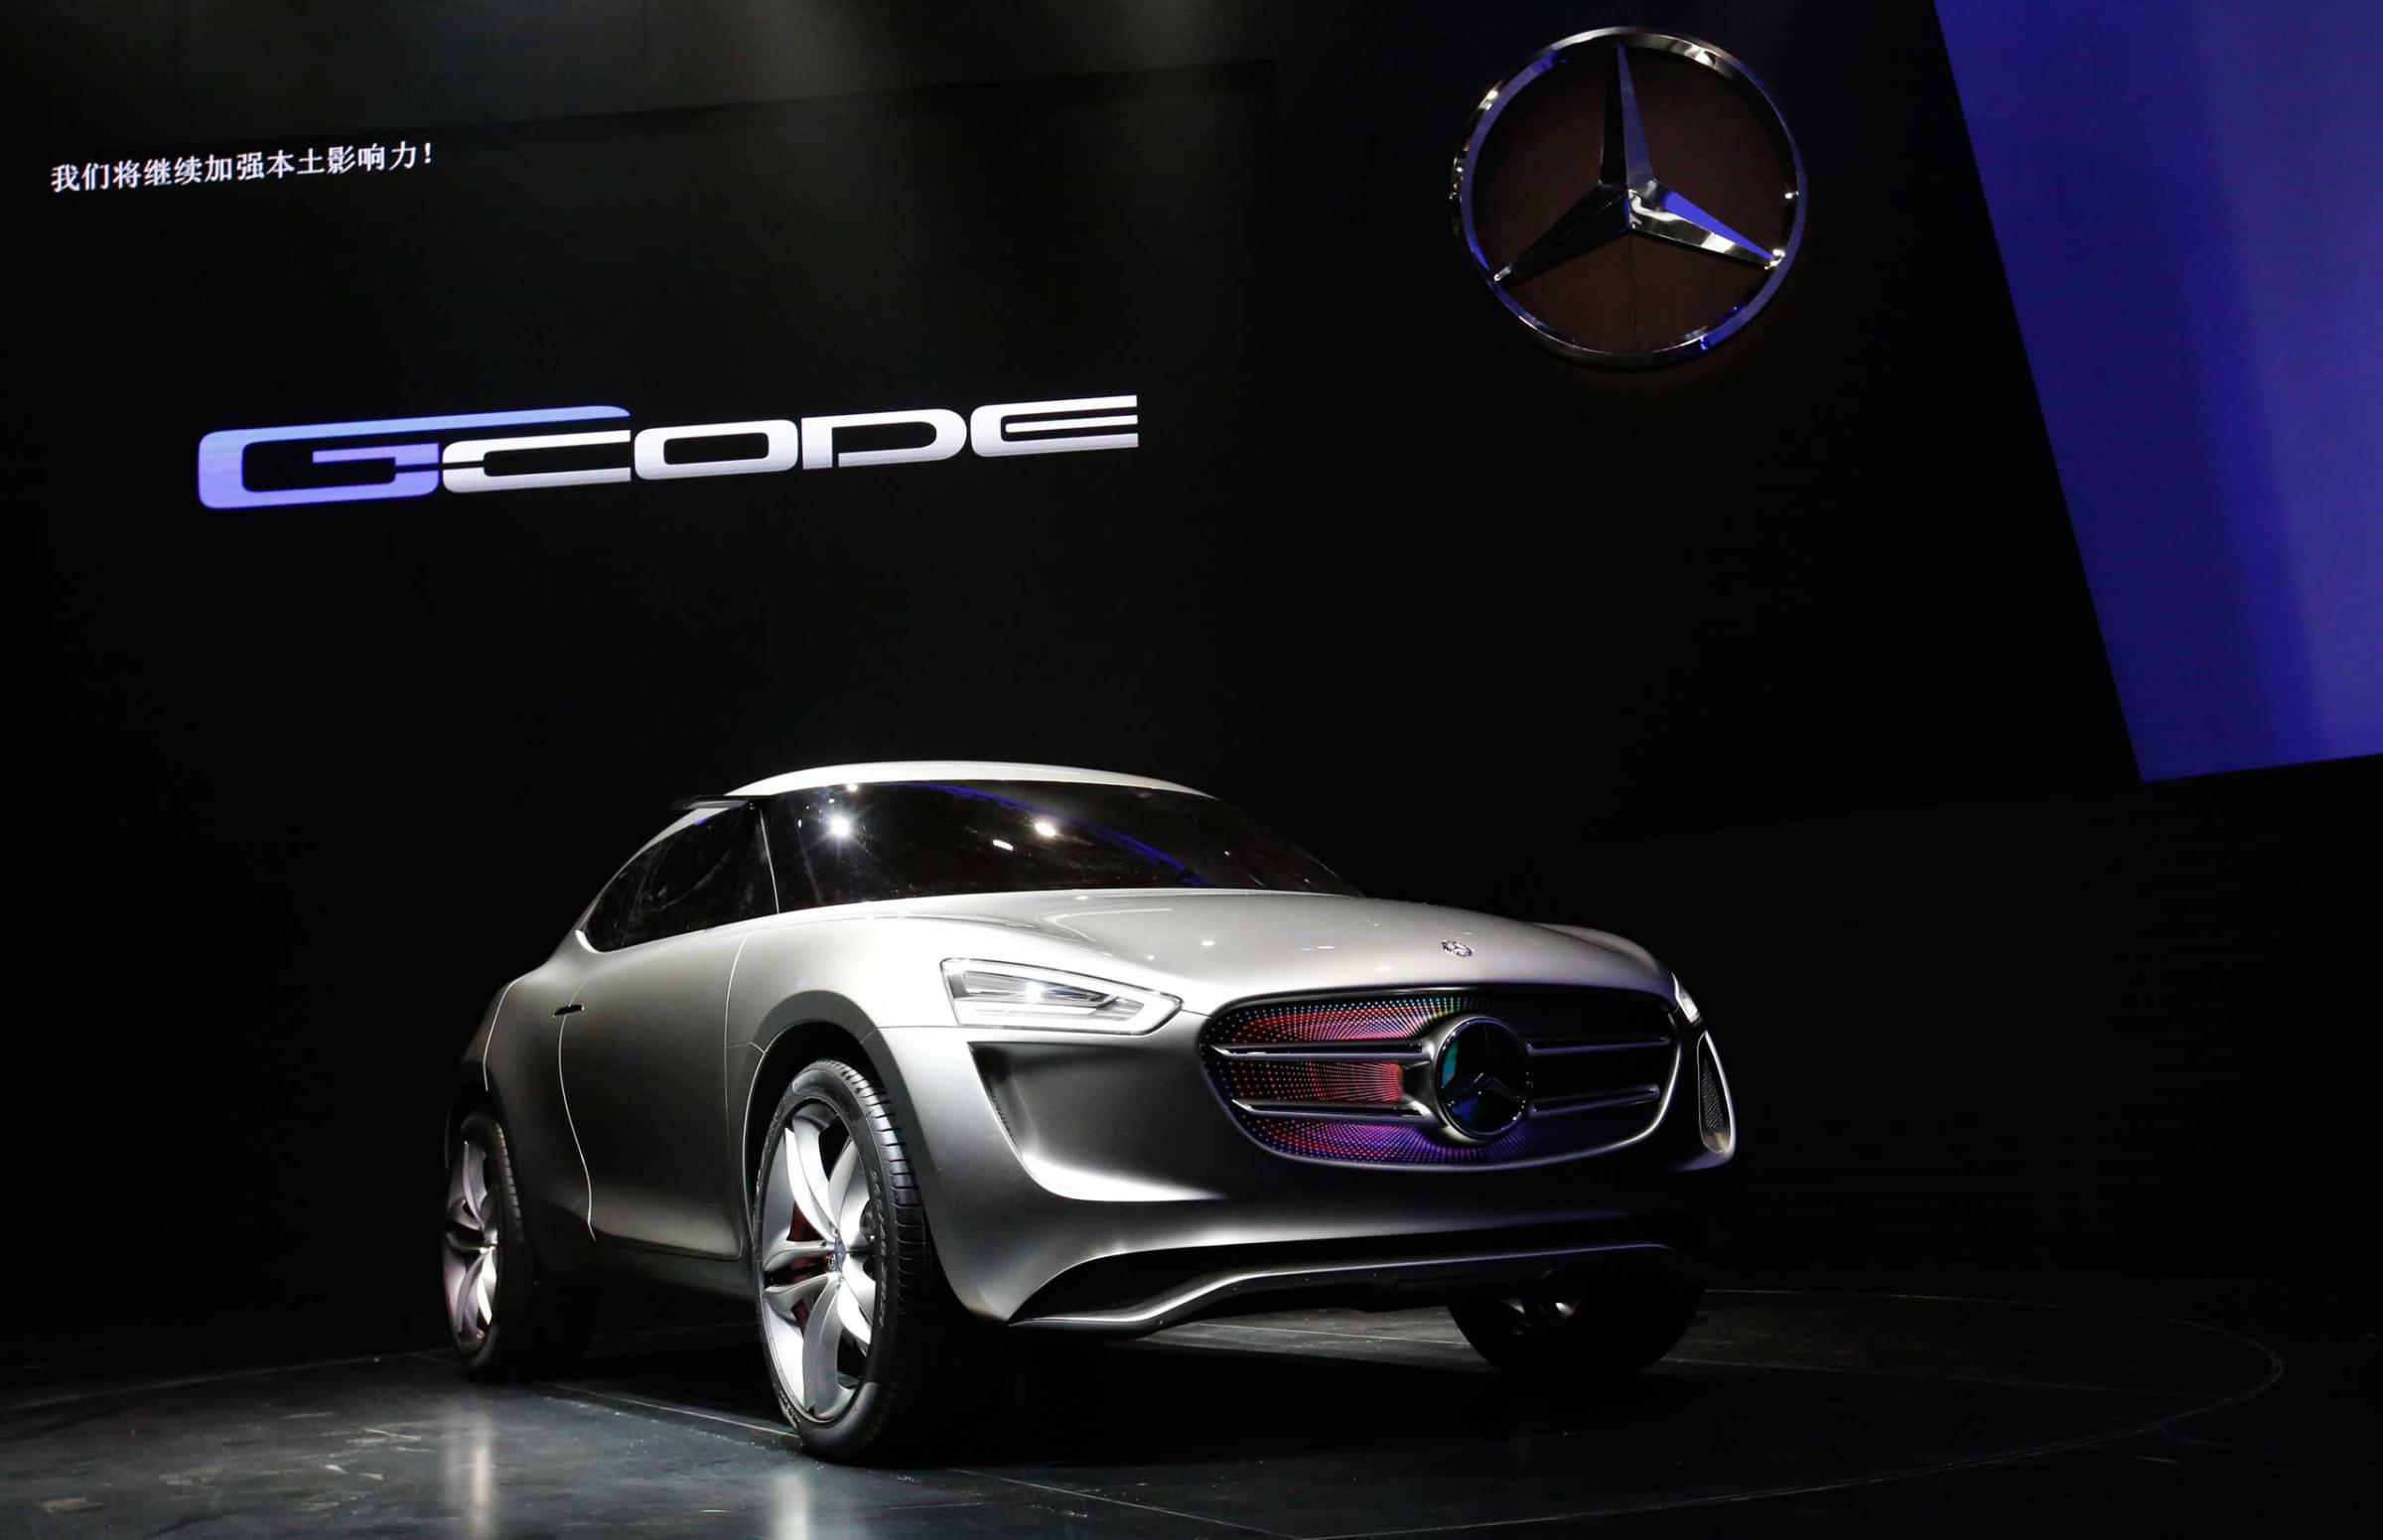 Mercedes-Benz's new Sport Utility Coupe concept car G-Code is seen at its unveiling event during the opening ceremony of Daimler AG's Mercedes-Benz research and development (R&amp;D) centre in Beijing on Nov. 3, 2014.